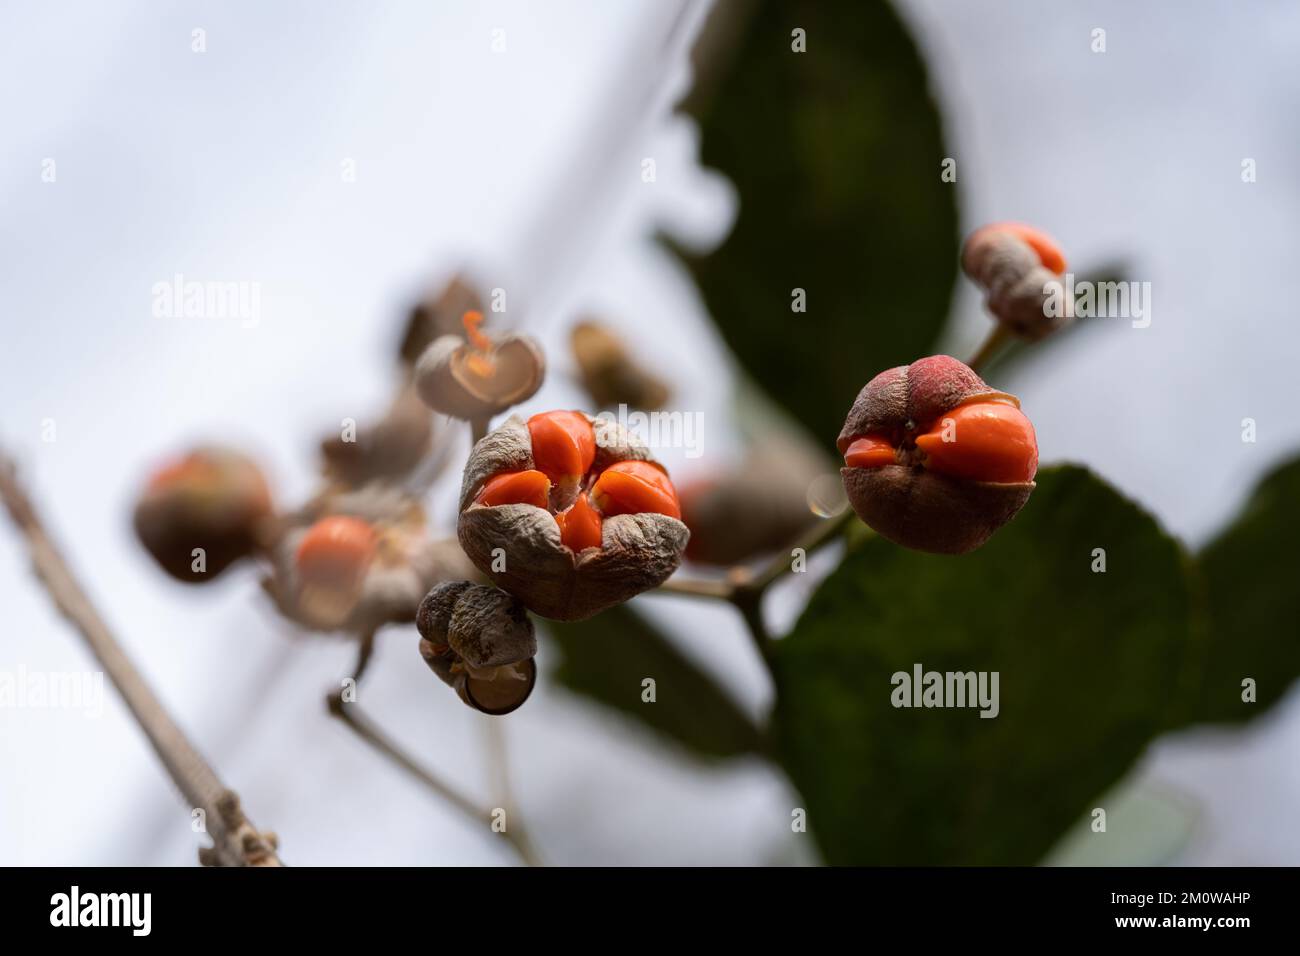 Seeds of Evergreen spindle tree Stock Photo